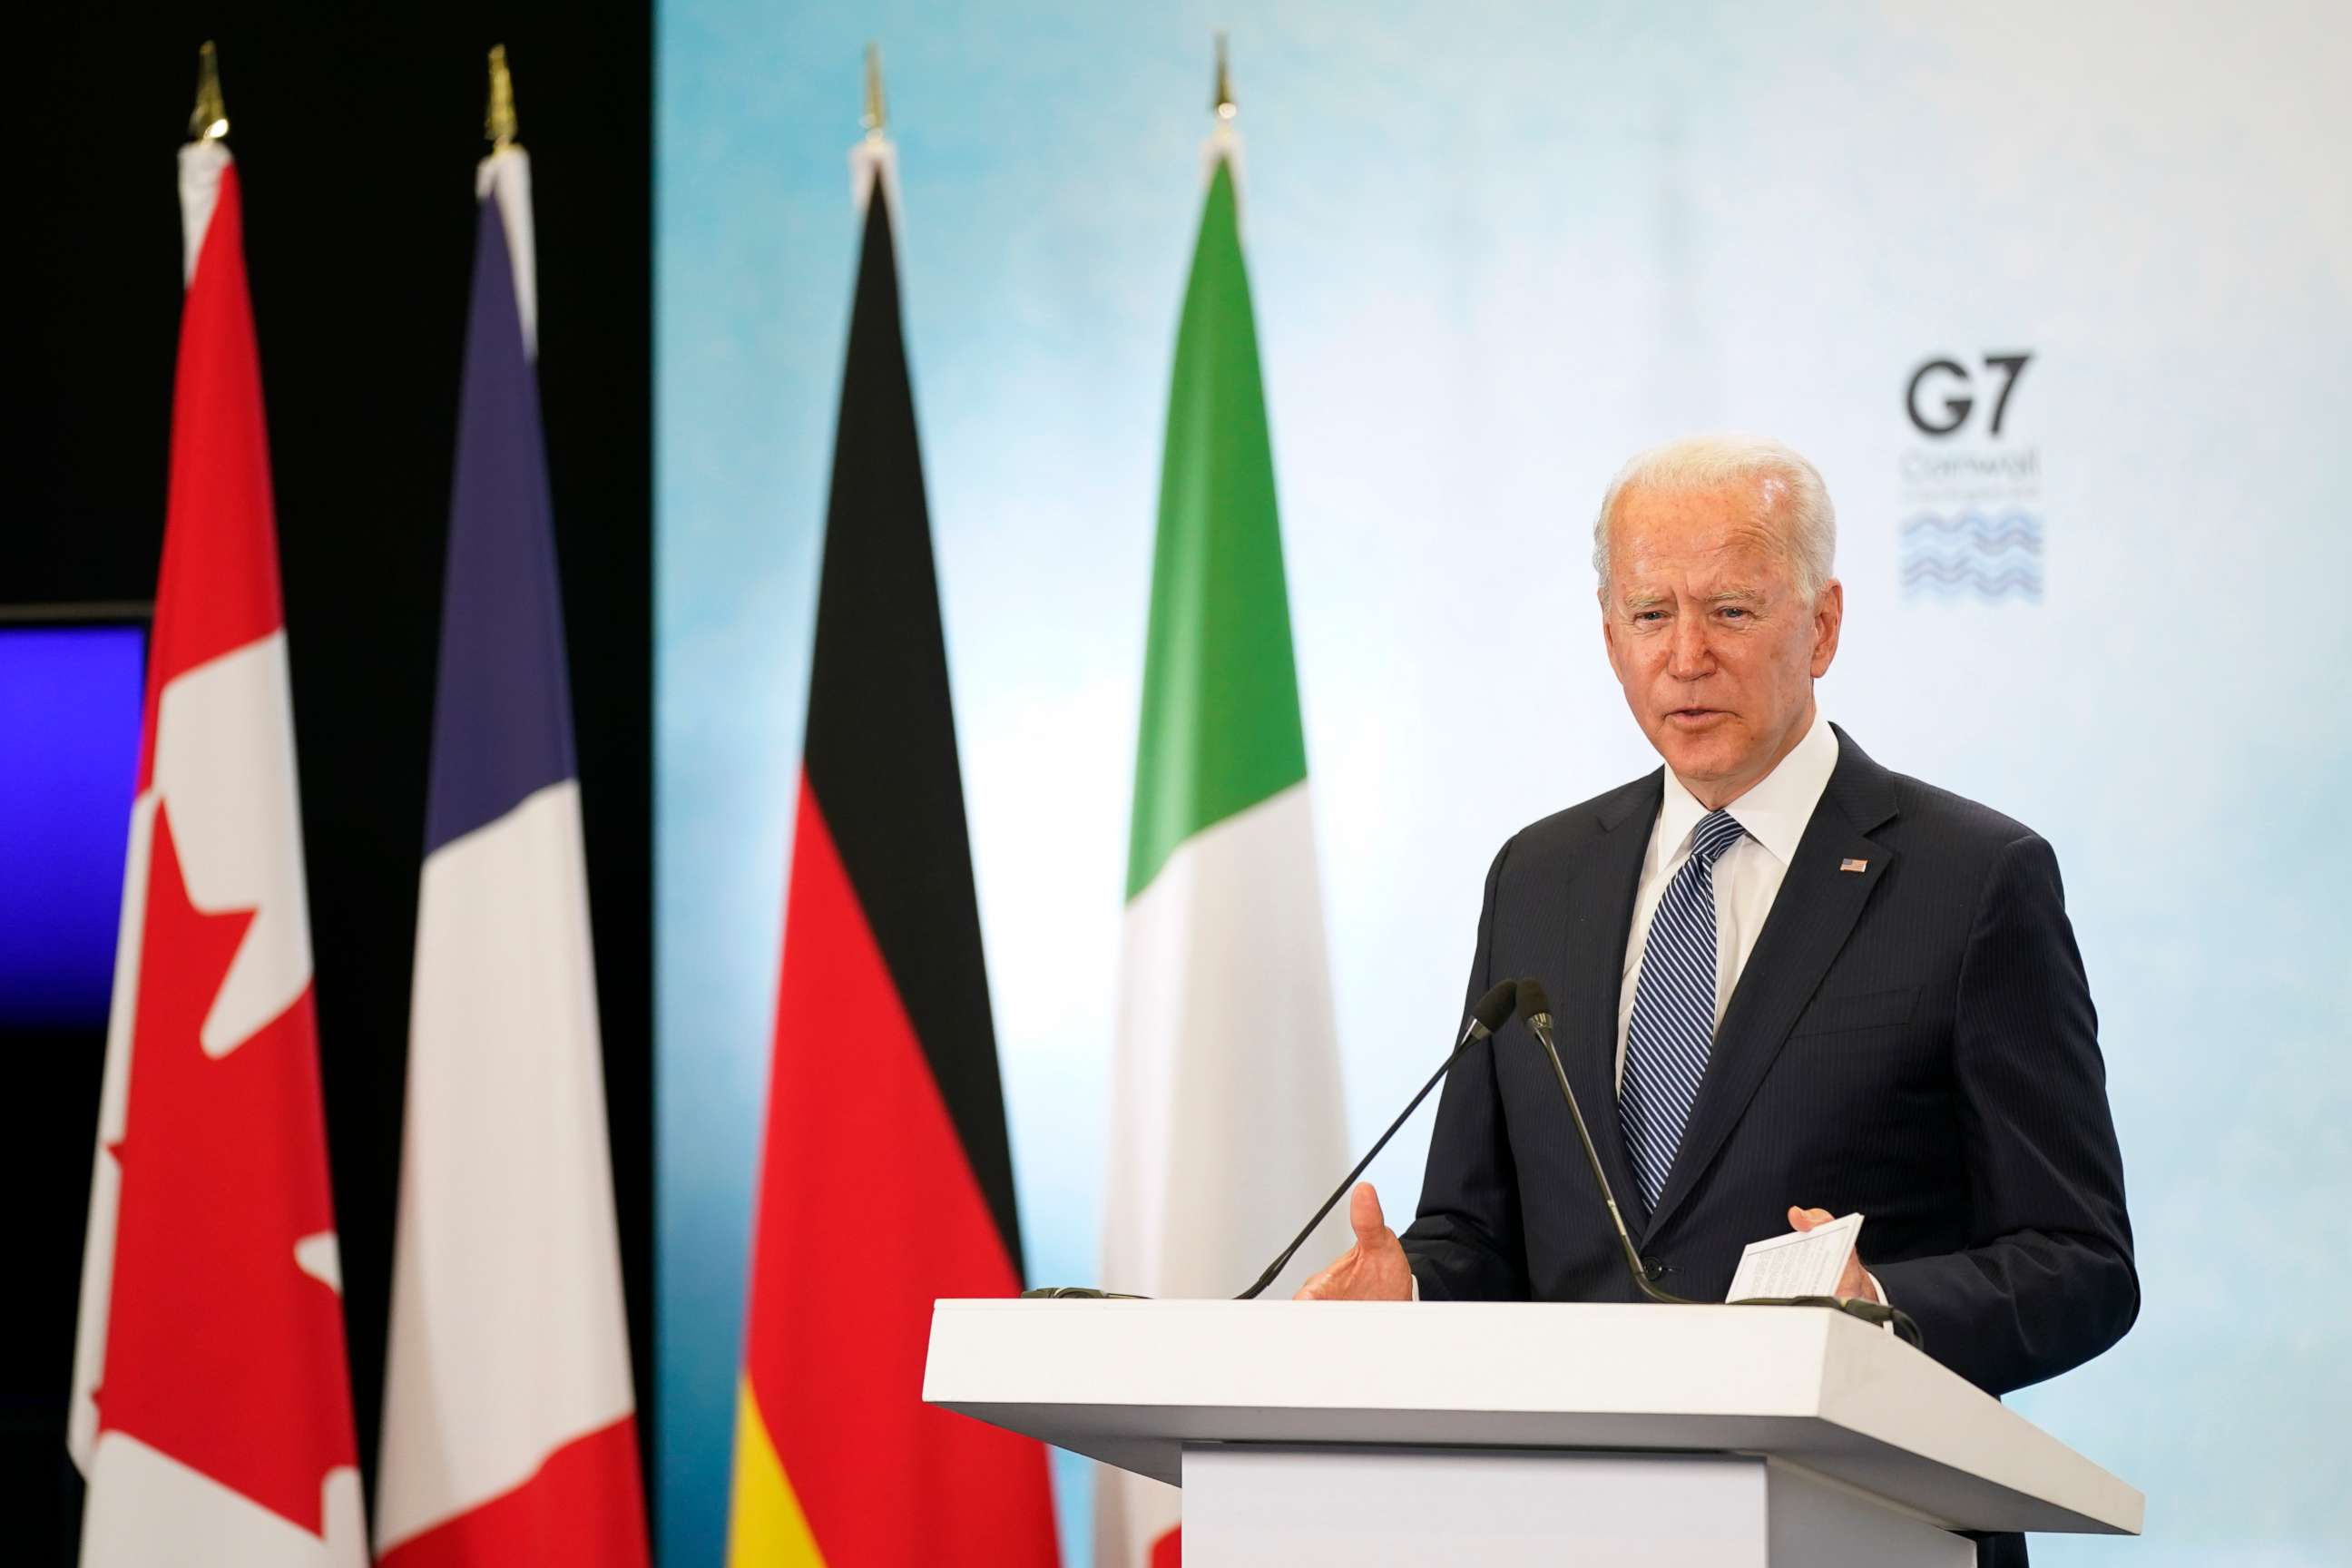 PHOTO: President Joe Biden speaks during a news conference after attending the G-7 summit, June 13, 2021, at Cornwall Airport in Newquay, England.